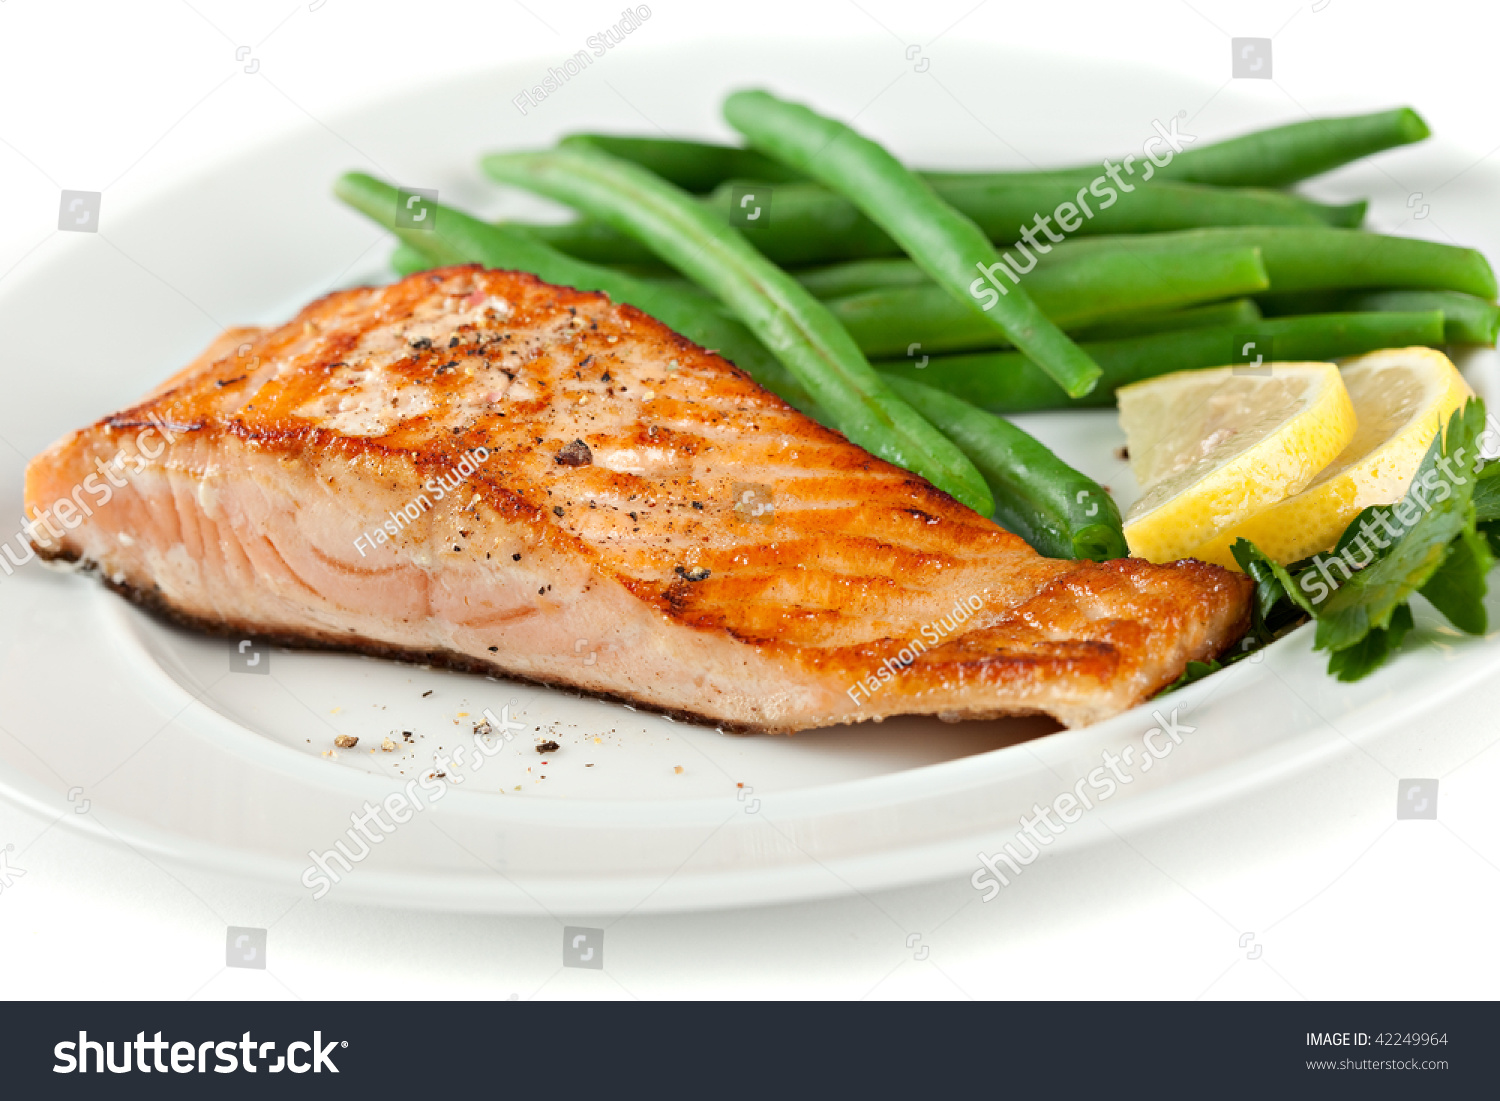 Closeup Of Grilled Salmon Fillet With Green Beans Plate Stock Photo ...